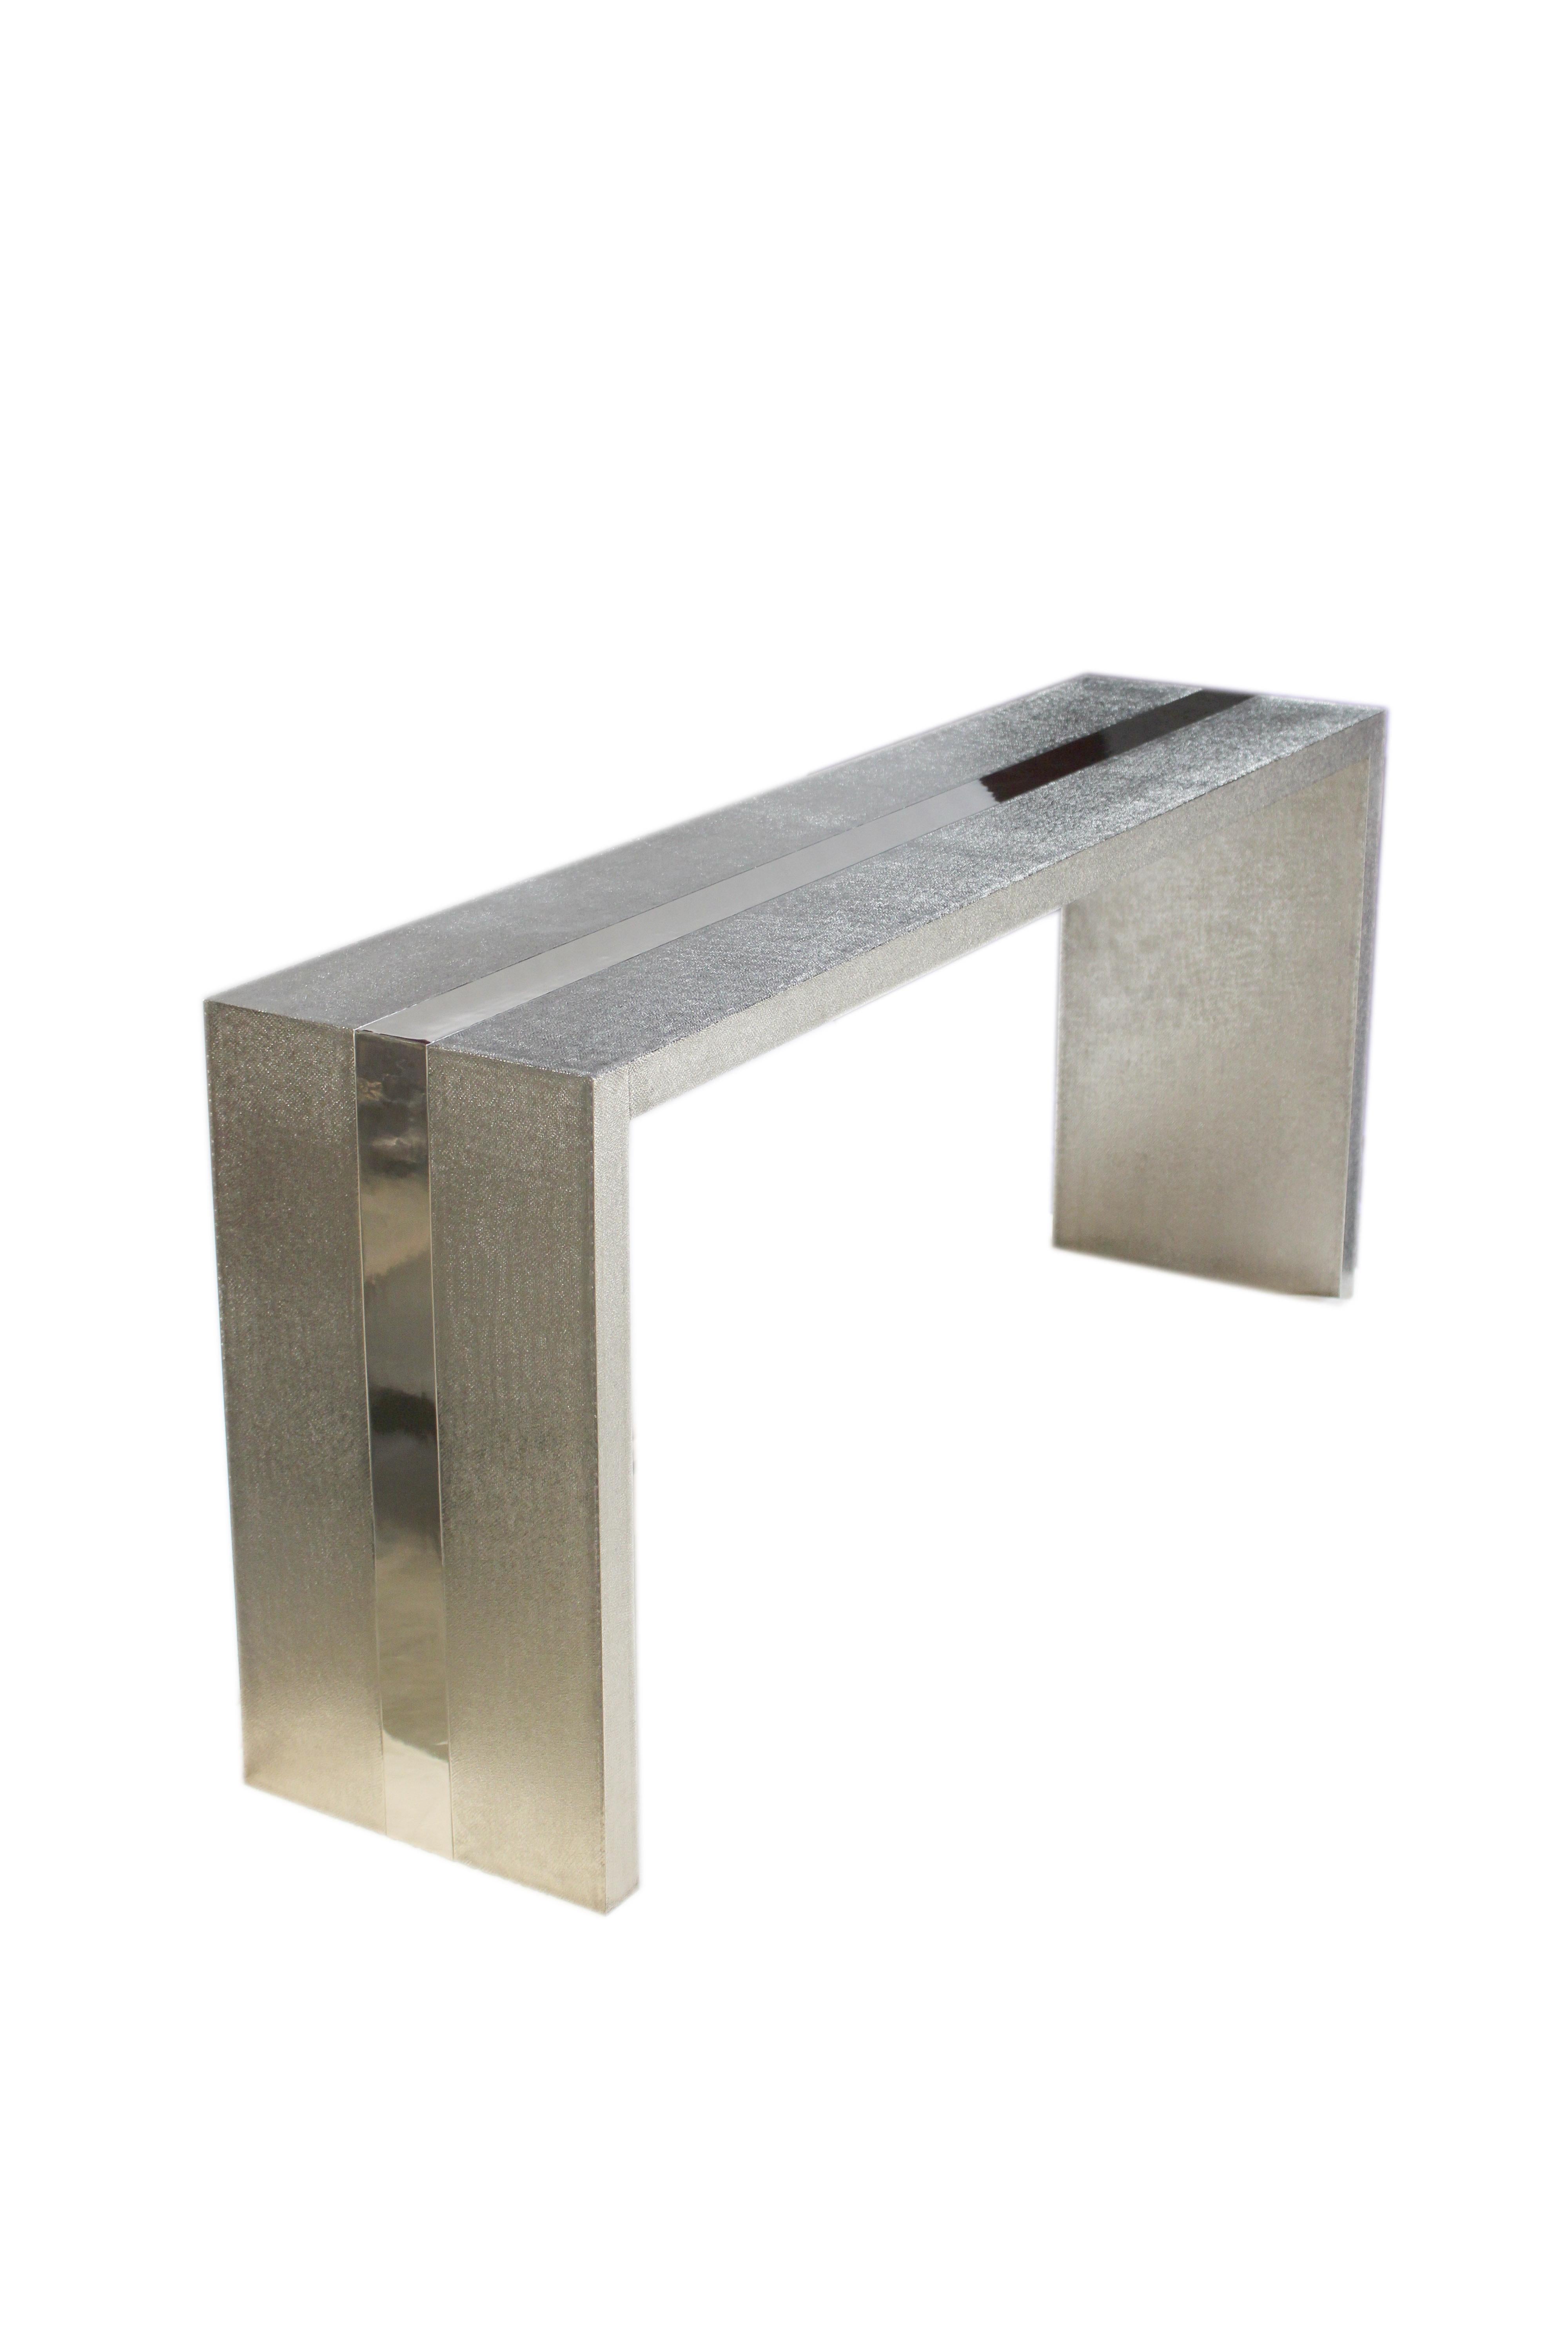 Art Deco Game Tables Rectangular Console in Smooth White Bronze by Alison Spear For Sale 6